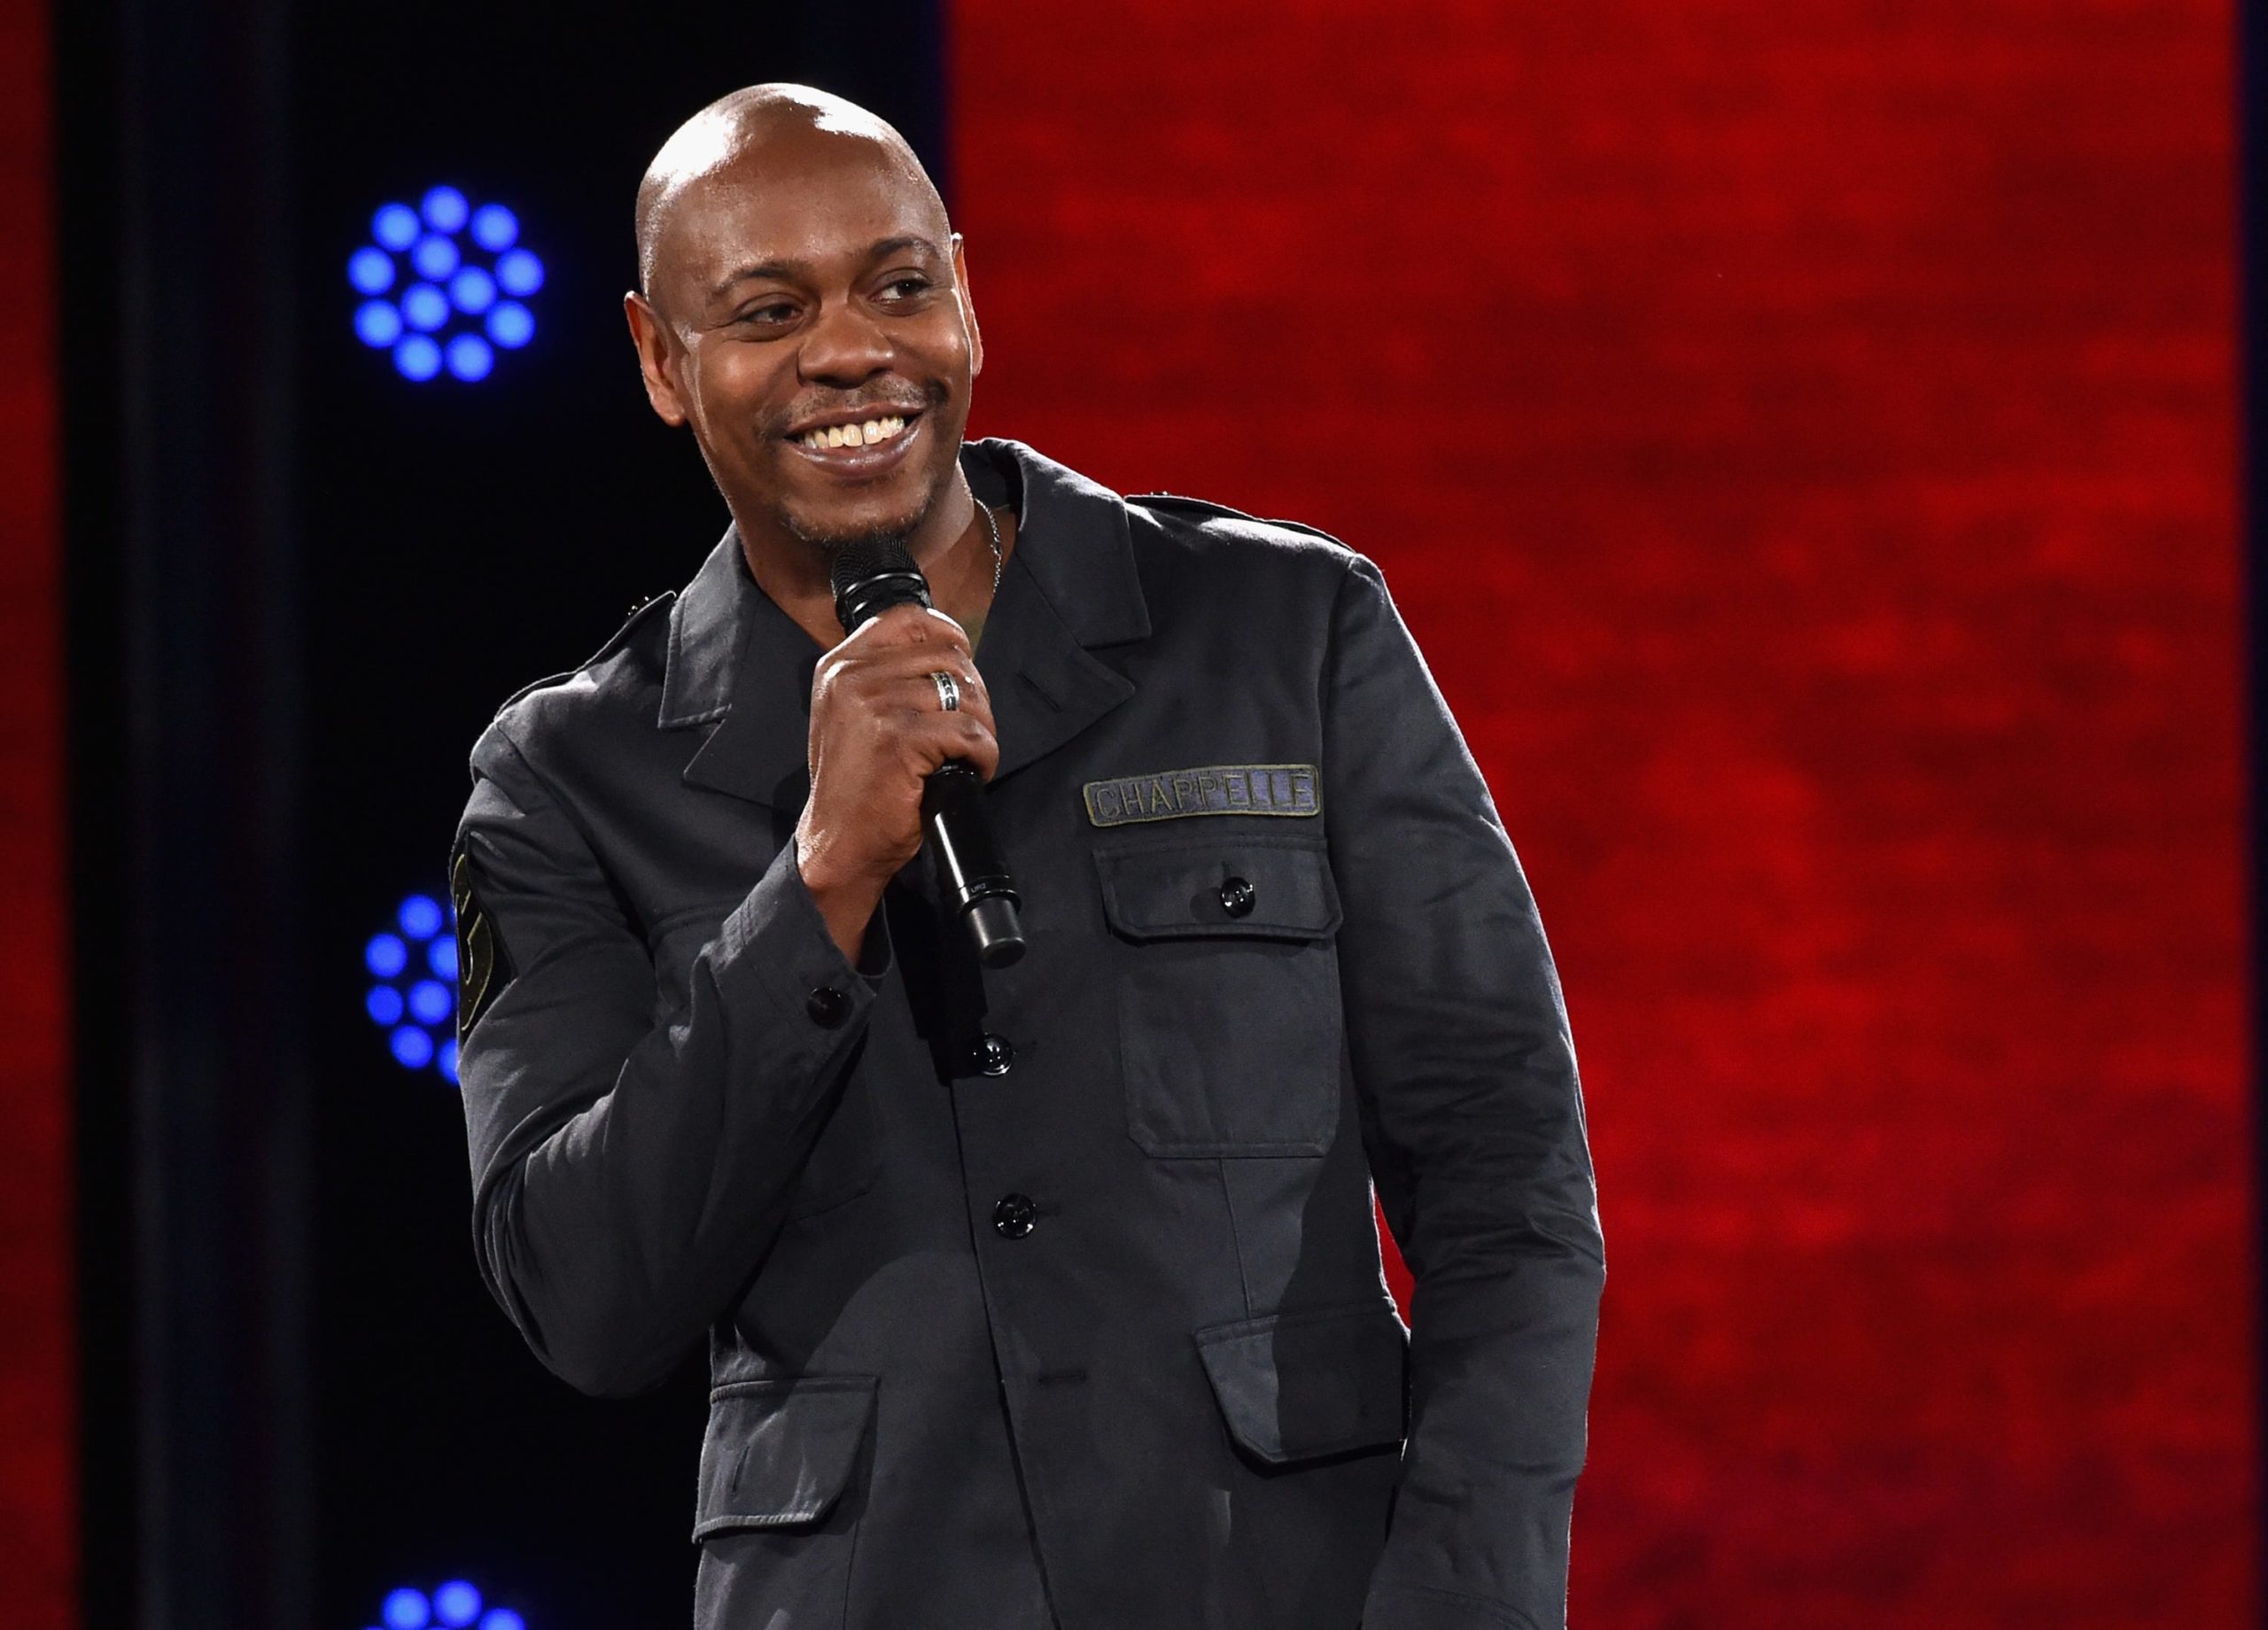 Dave Chappelle’s new Netflix particular is about police brutality